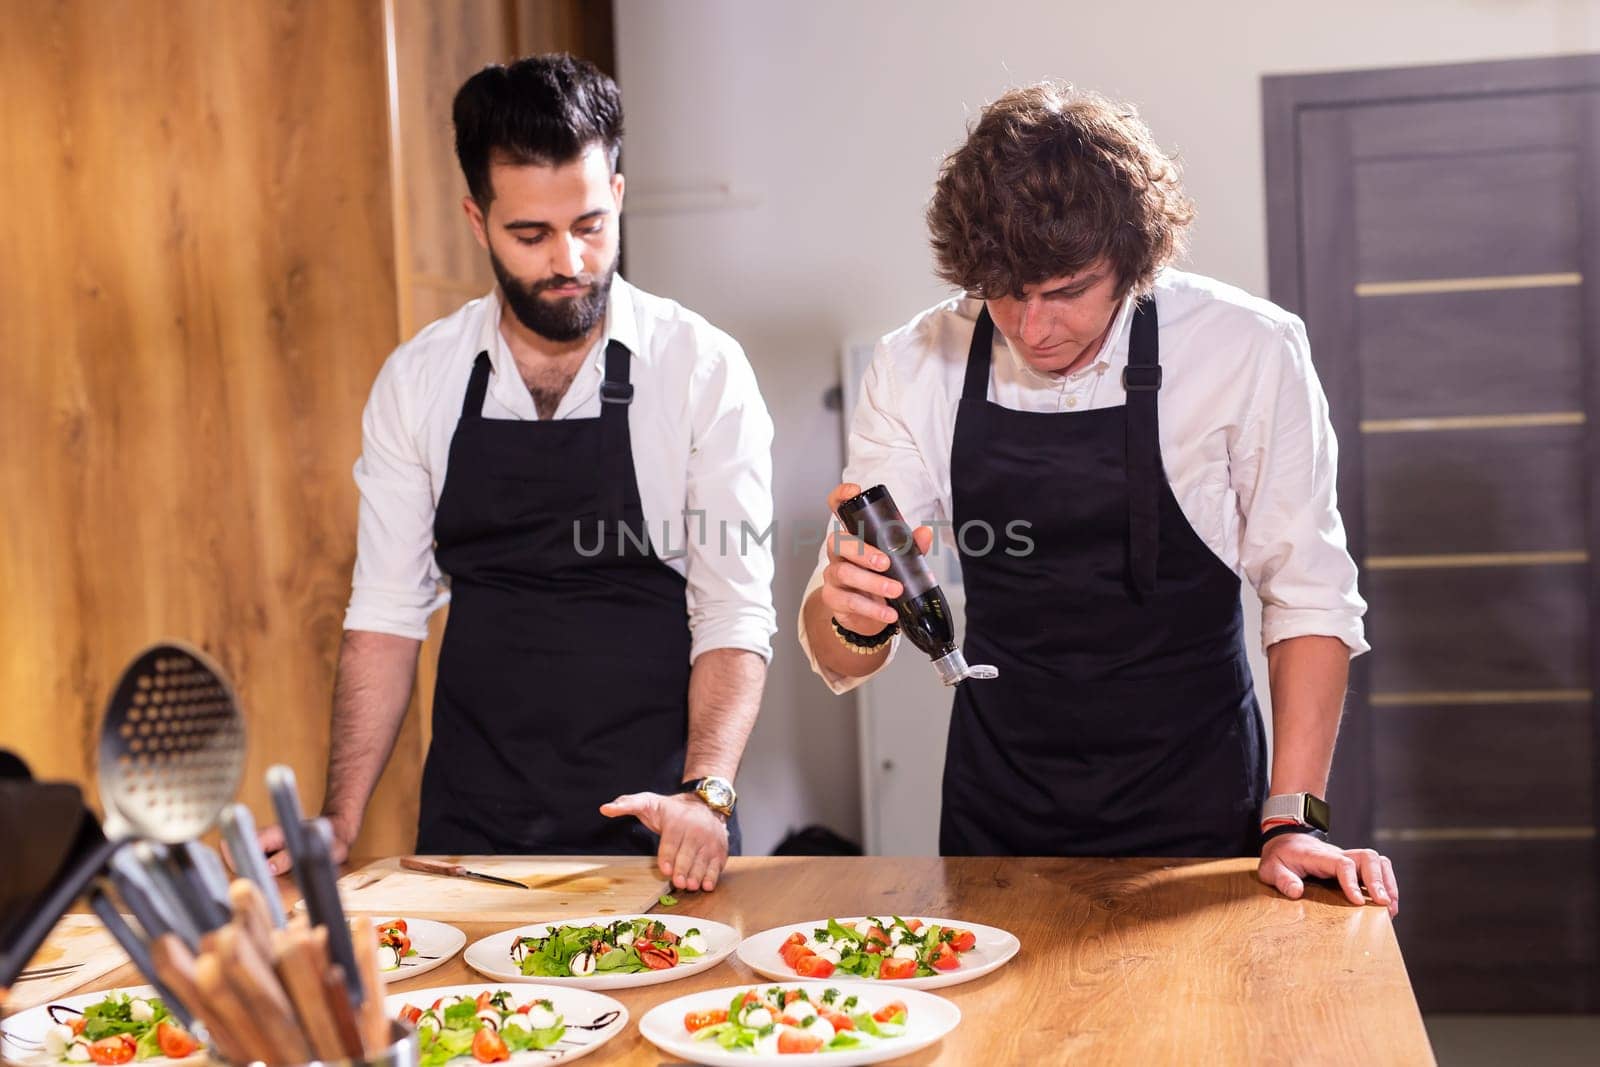 Chef pouring dressing over caprese salad in restaurant kitchen - food concept